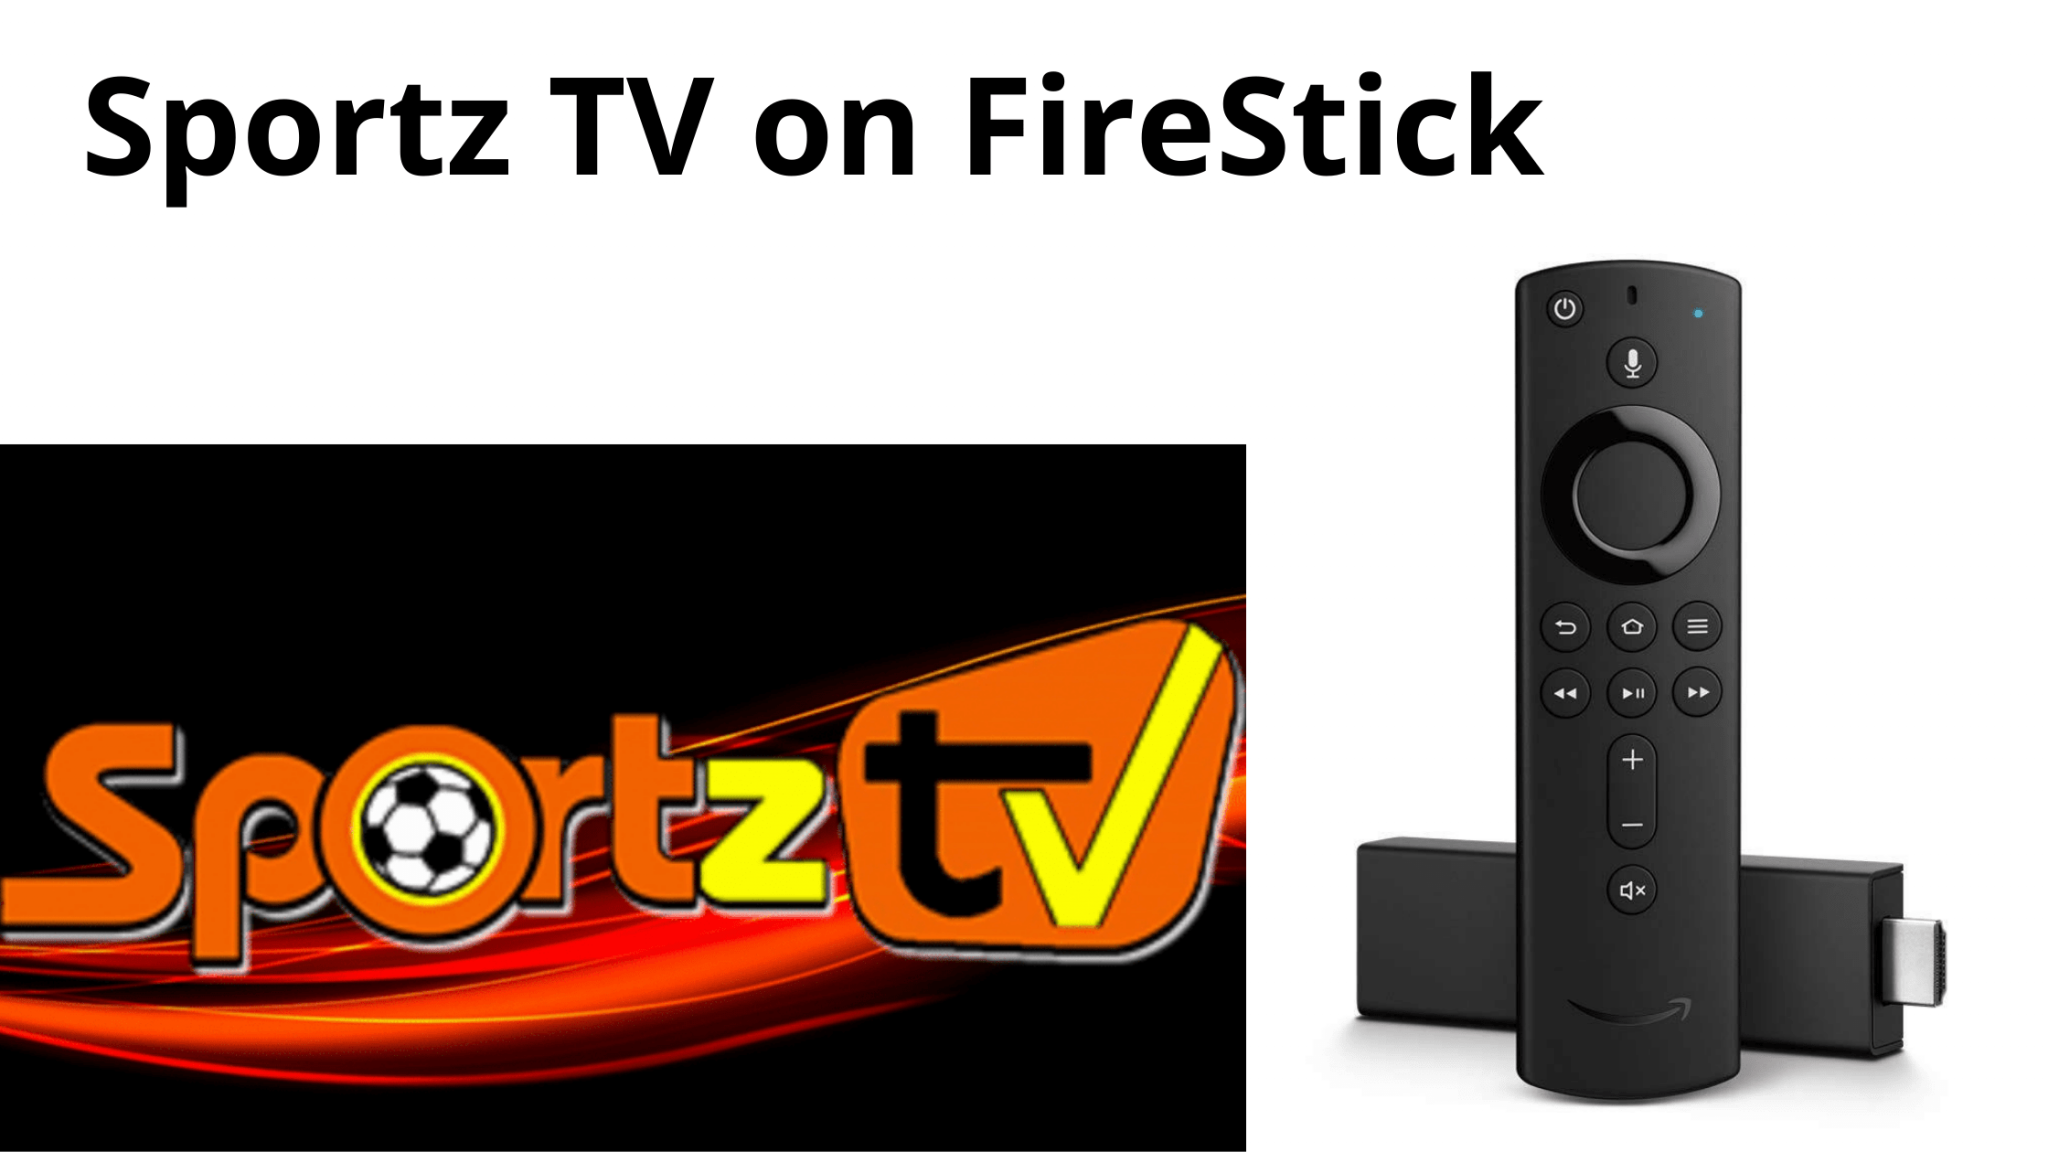 How to Download and Install Sportz TV on Firestick